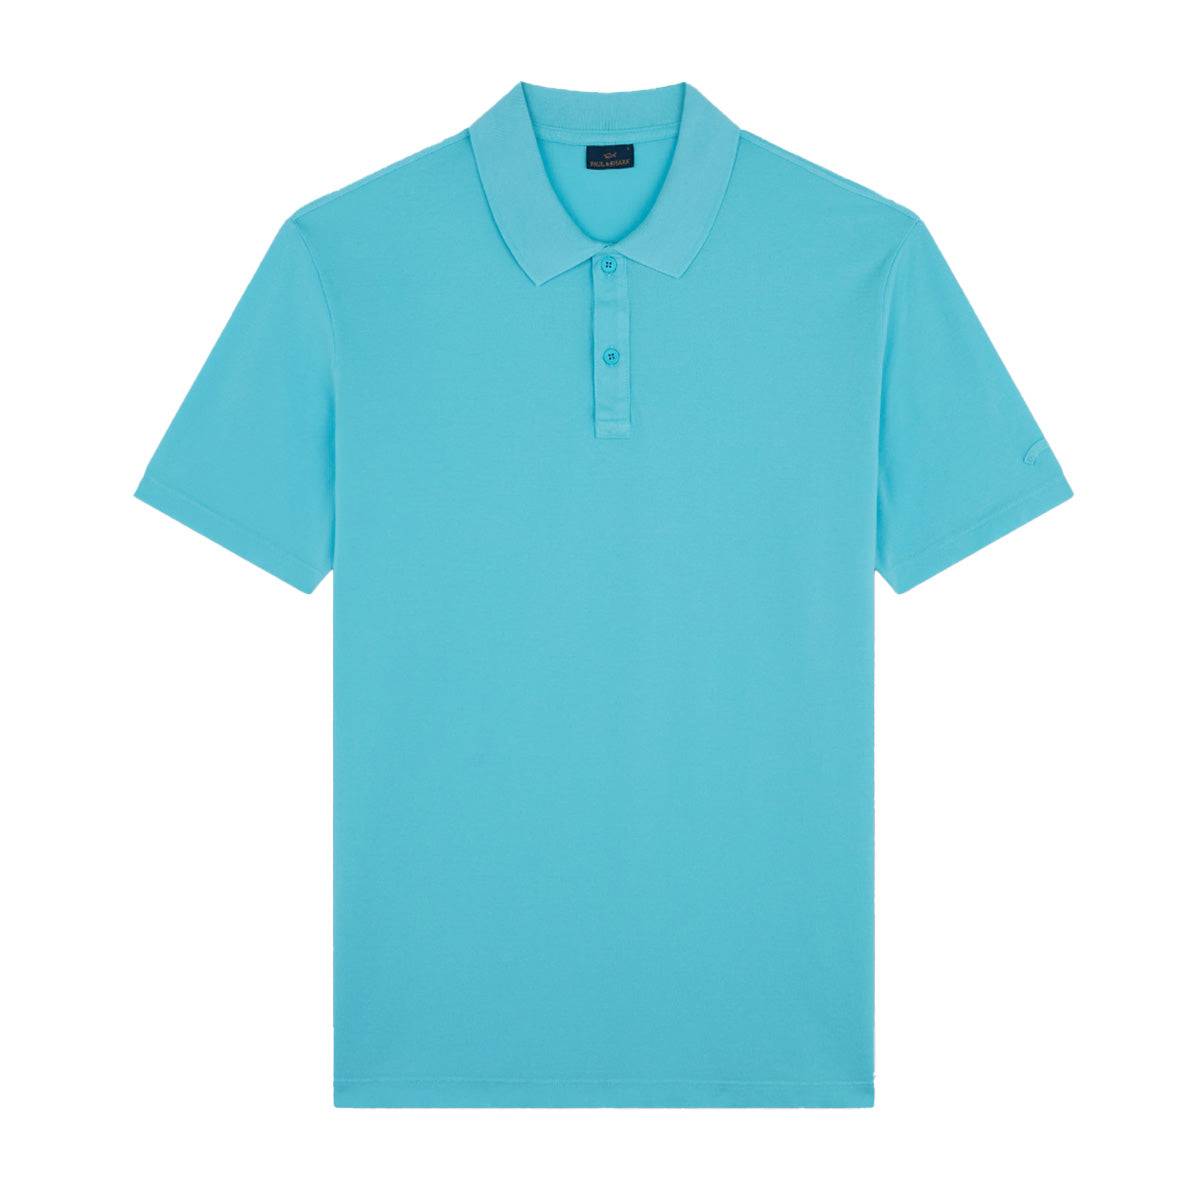 Washed Turquoise Cotton Piqué Polo Shirt S/S POLOS Paul &amp; Shark   